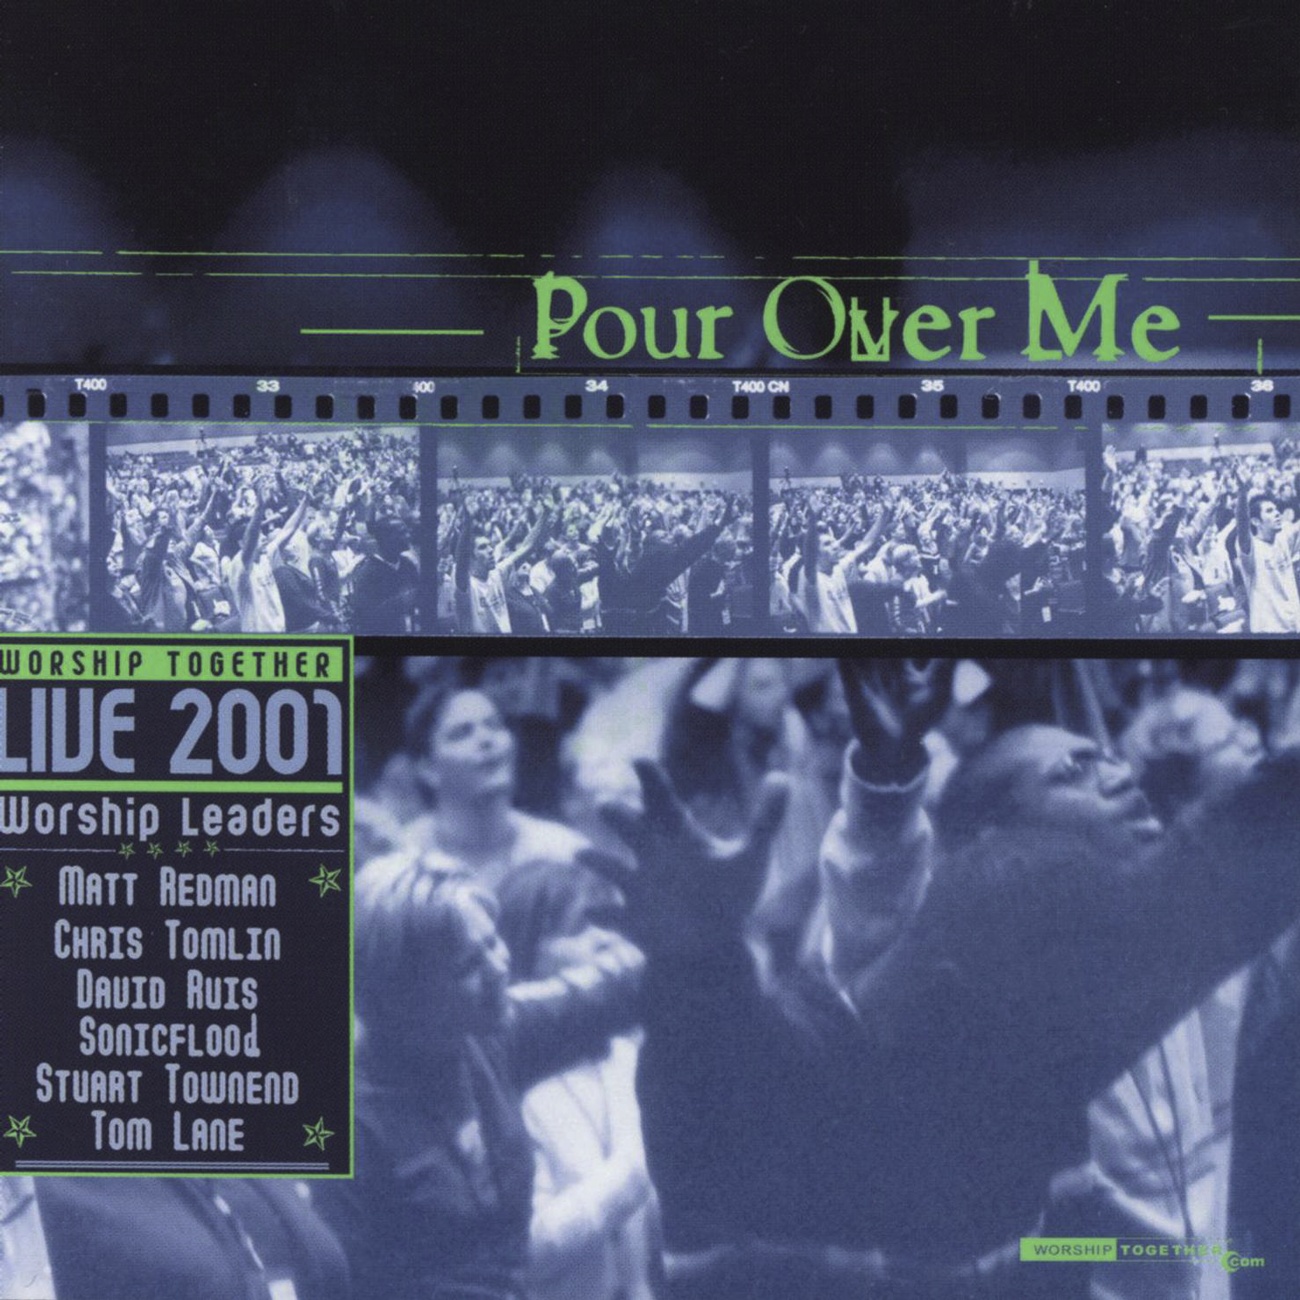 Pour Over Me - Worship Together Live 2001